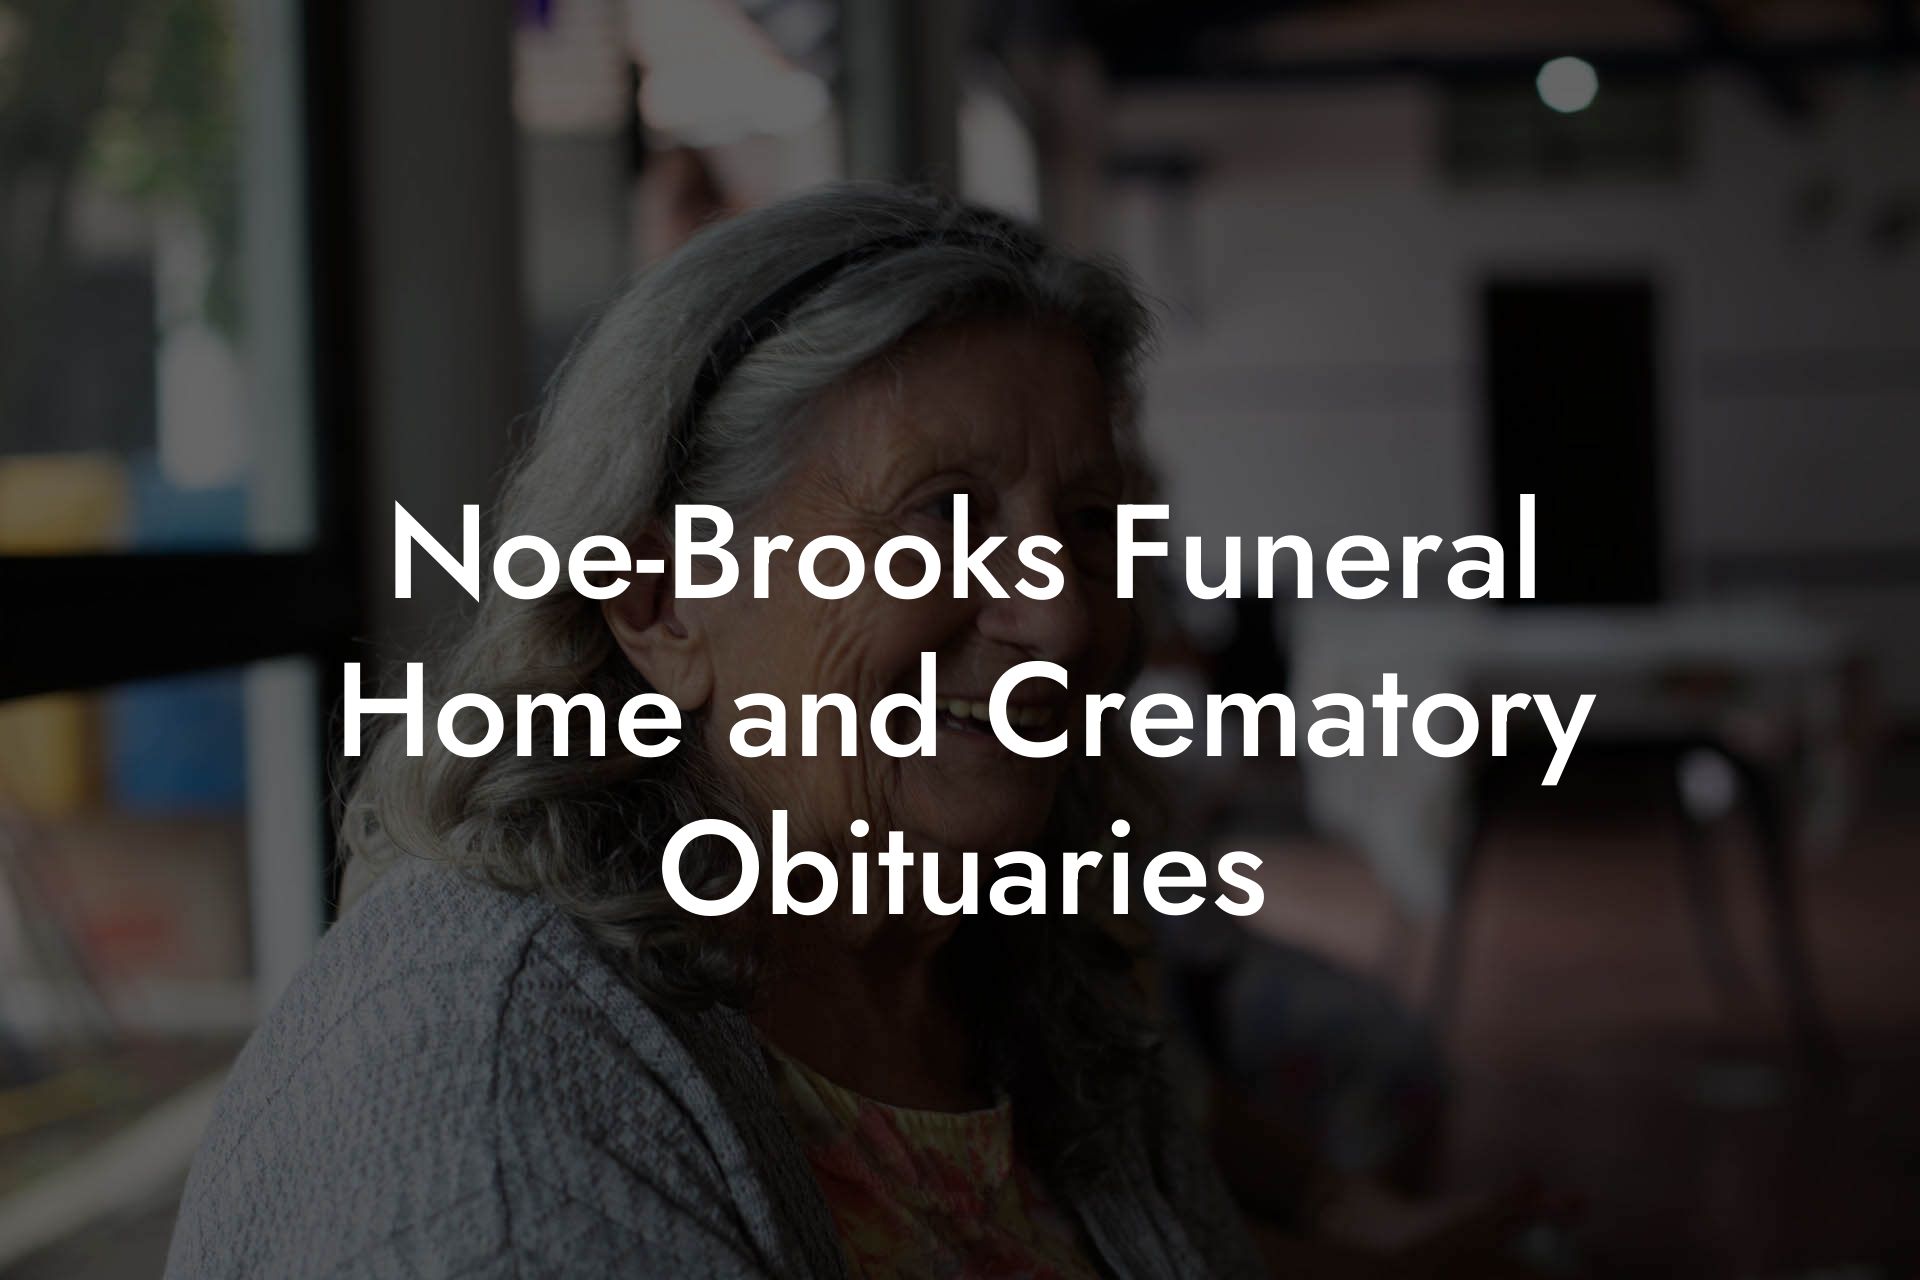 Noe-Brooks Funeral Home and Crematory Obituaries